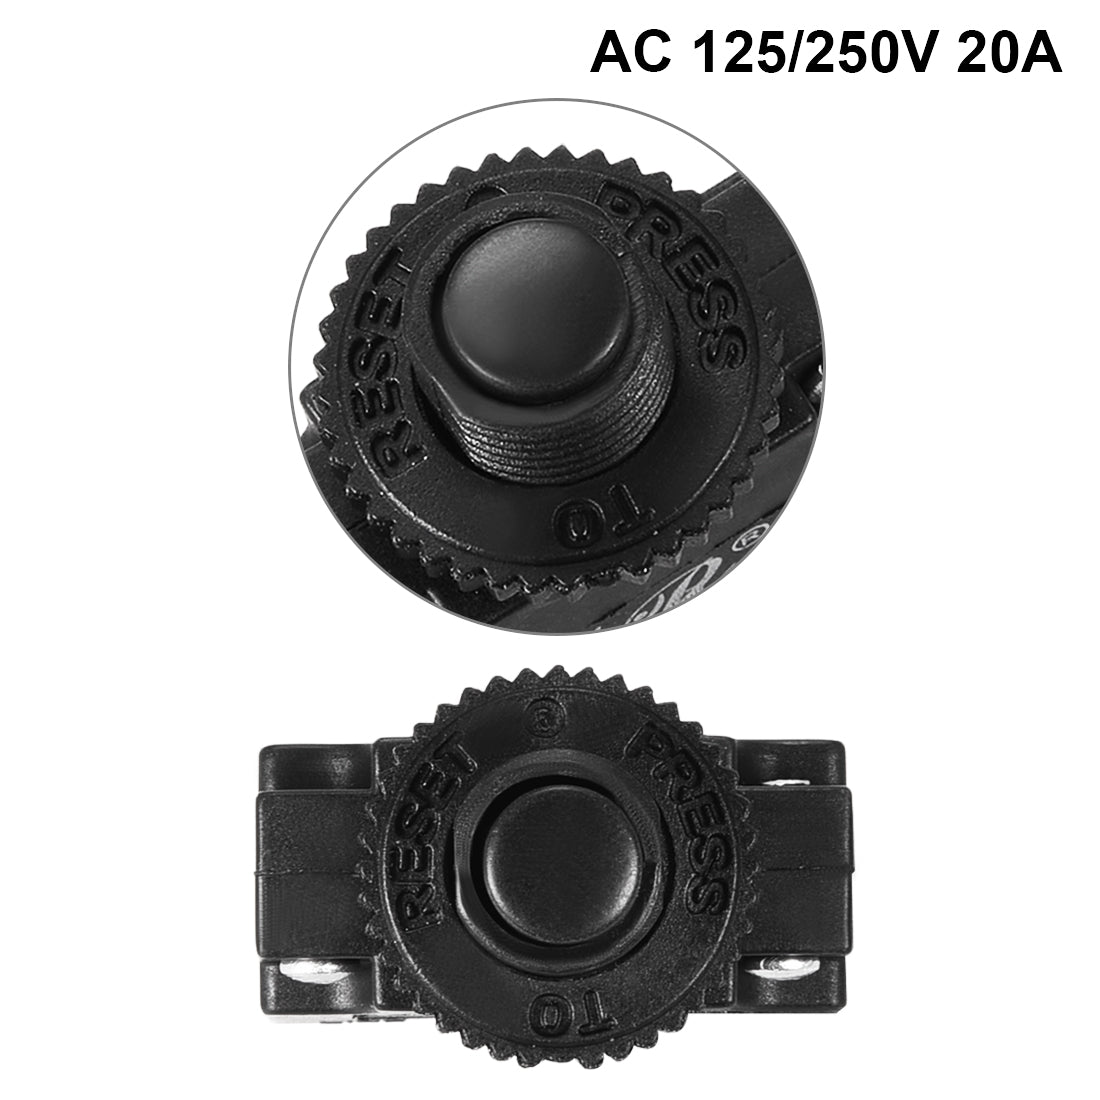 uxcell Uxcell 2Pcs Thermal Overload Protector AC 125/250V 20A Push Button Reset Breaker w Knob